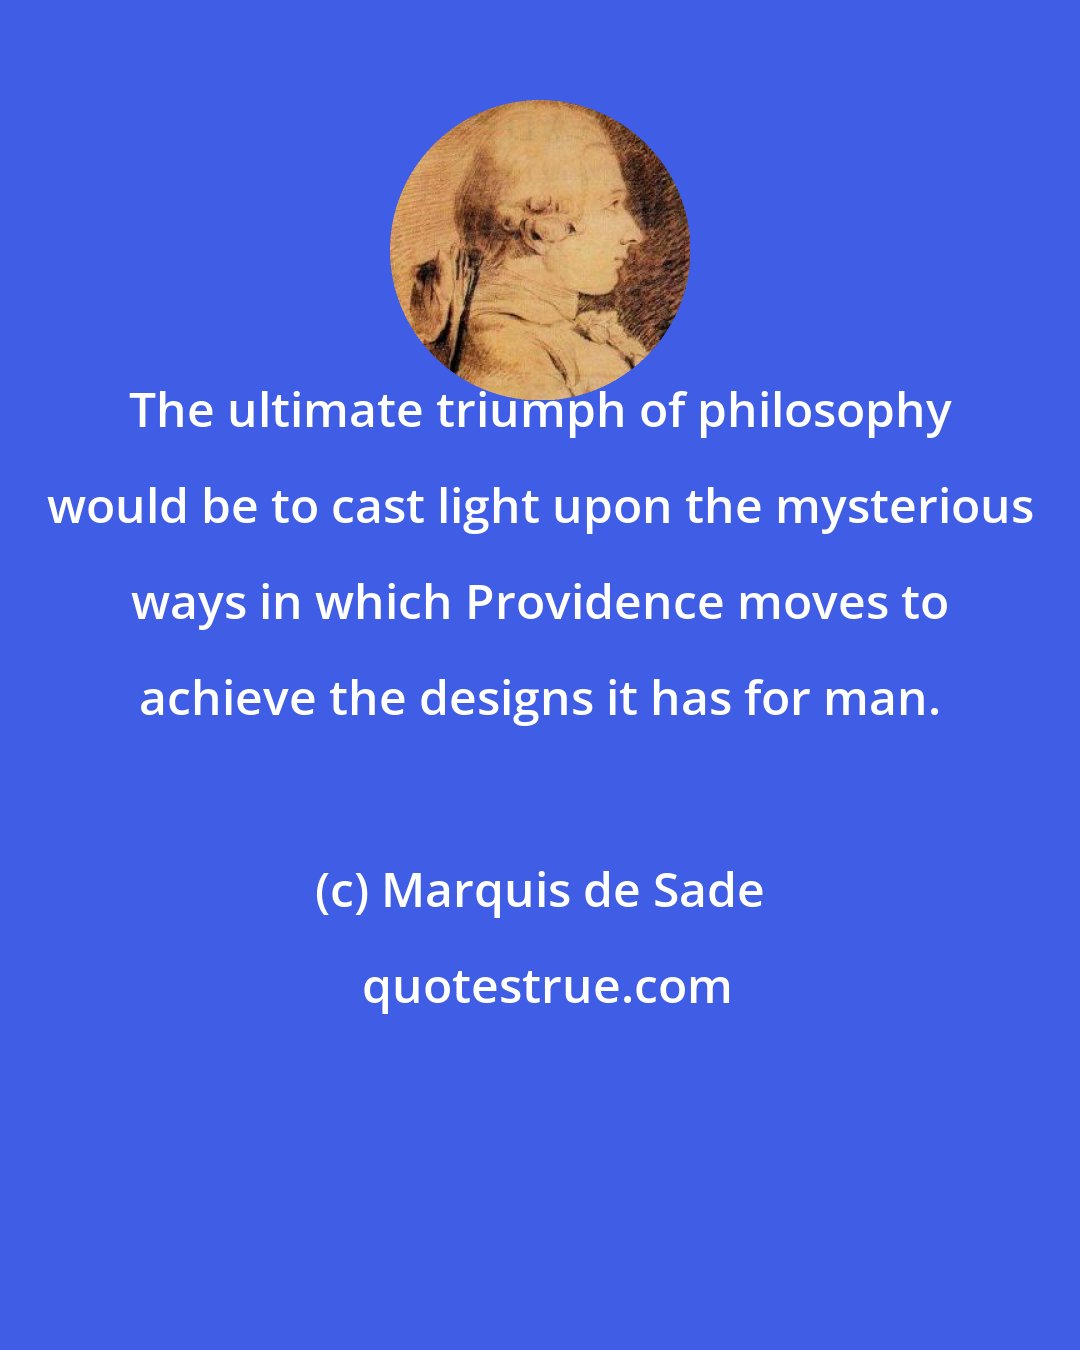 Marquis de Sade: The ultimate triumph of philosophy would be to cast light upon the mysterious ways in which Providence moves to achieve the designs it has for man.